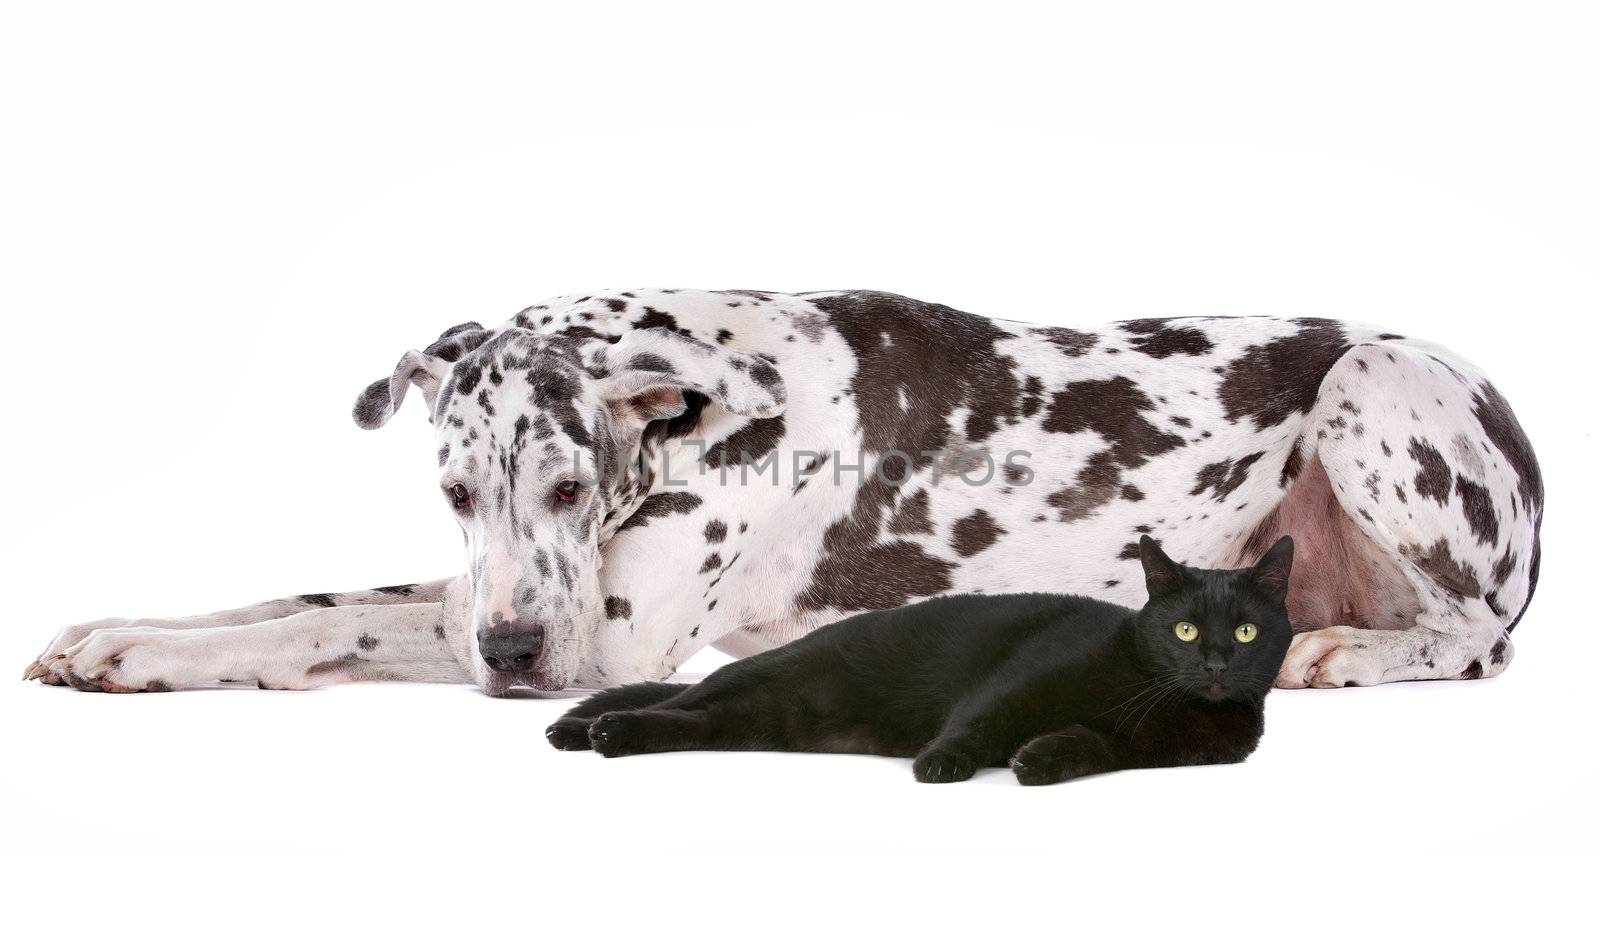 Great Dane and a black cat by eriklam